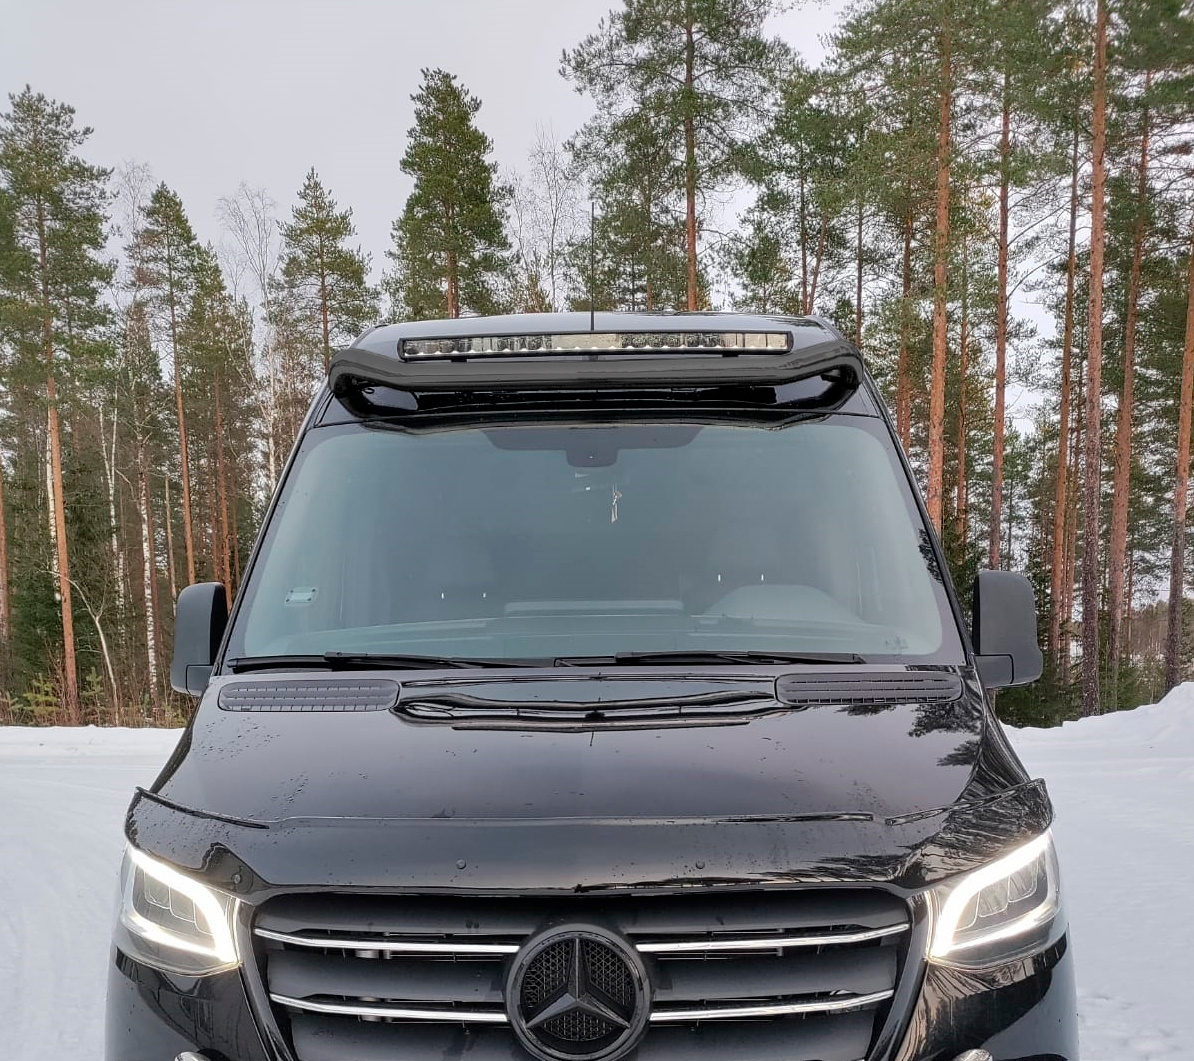 VW Crafter Wide light rail to front roof (Black)